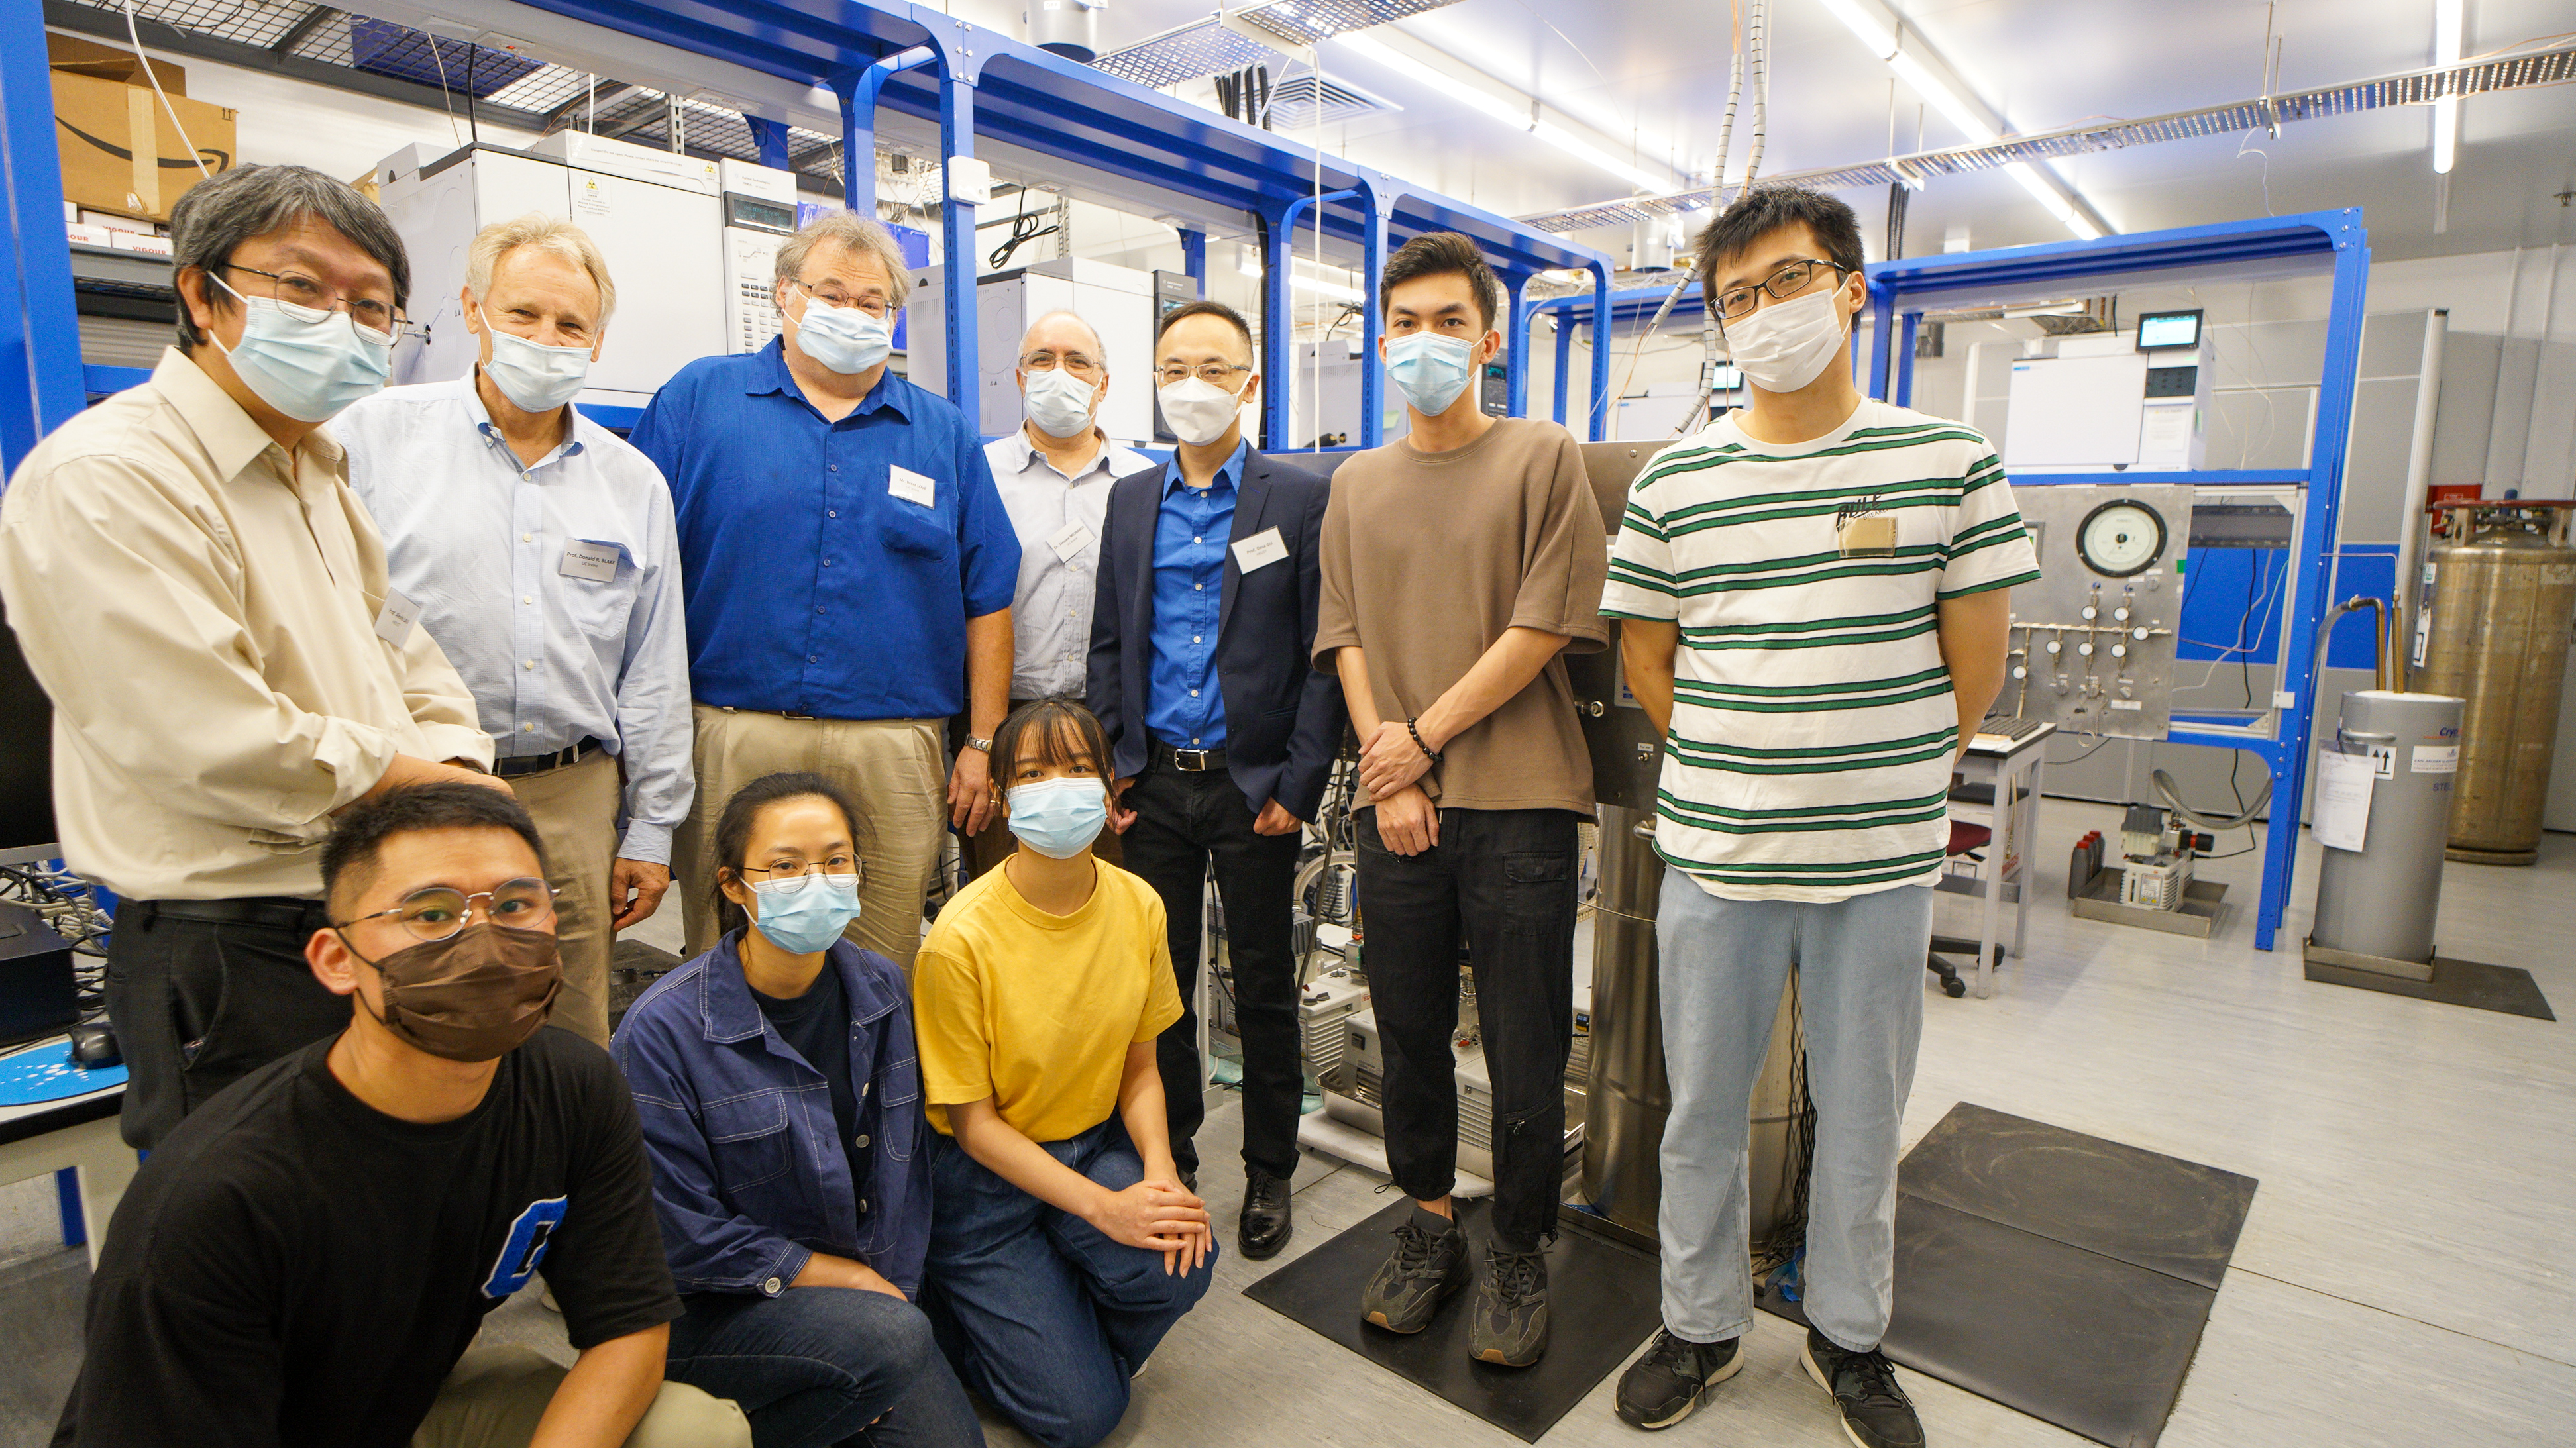 The established Gold Standard VOC laboratory in Hong Kong, led by HKUST Prof. Alexis LAU (back row, first left) and Prof. Dasa GU (back row, third right), and Prof. Donald R. BLAKE from UC-Irvin (back row, second left), serves as a reference laboratory to help enhance the region’s capability in VOC measurements and analyses.